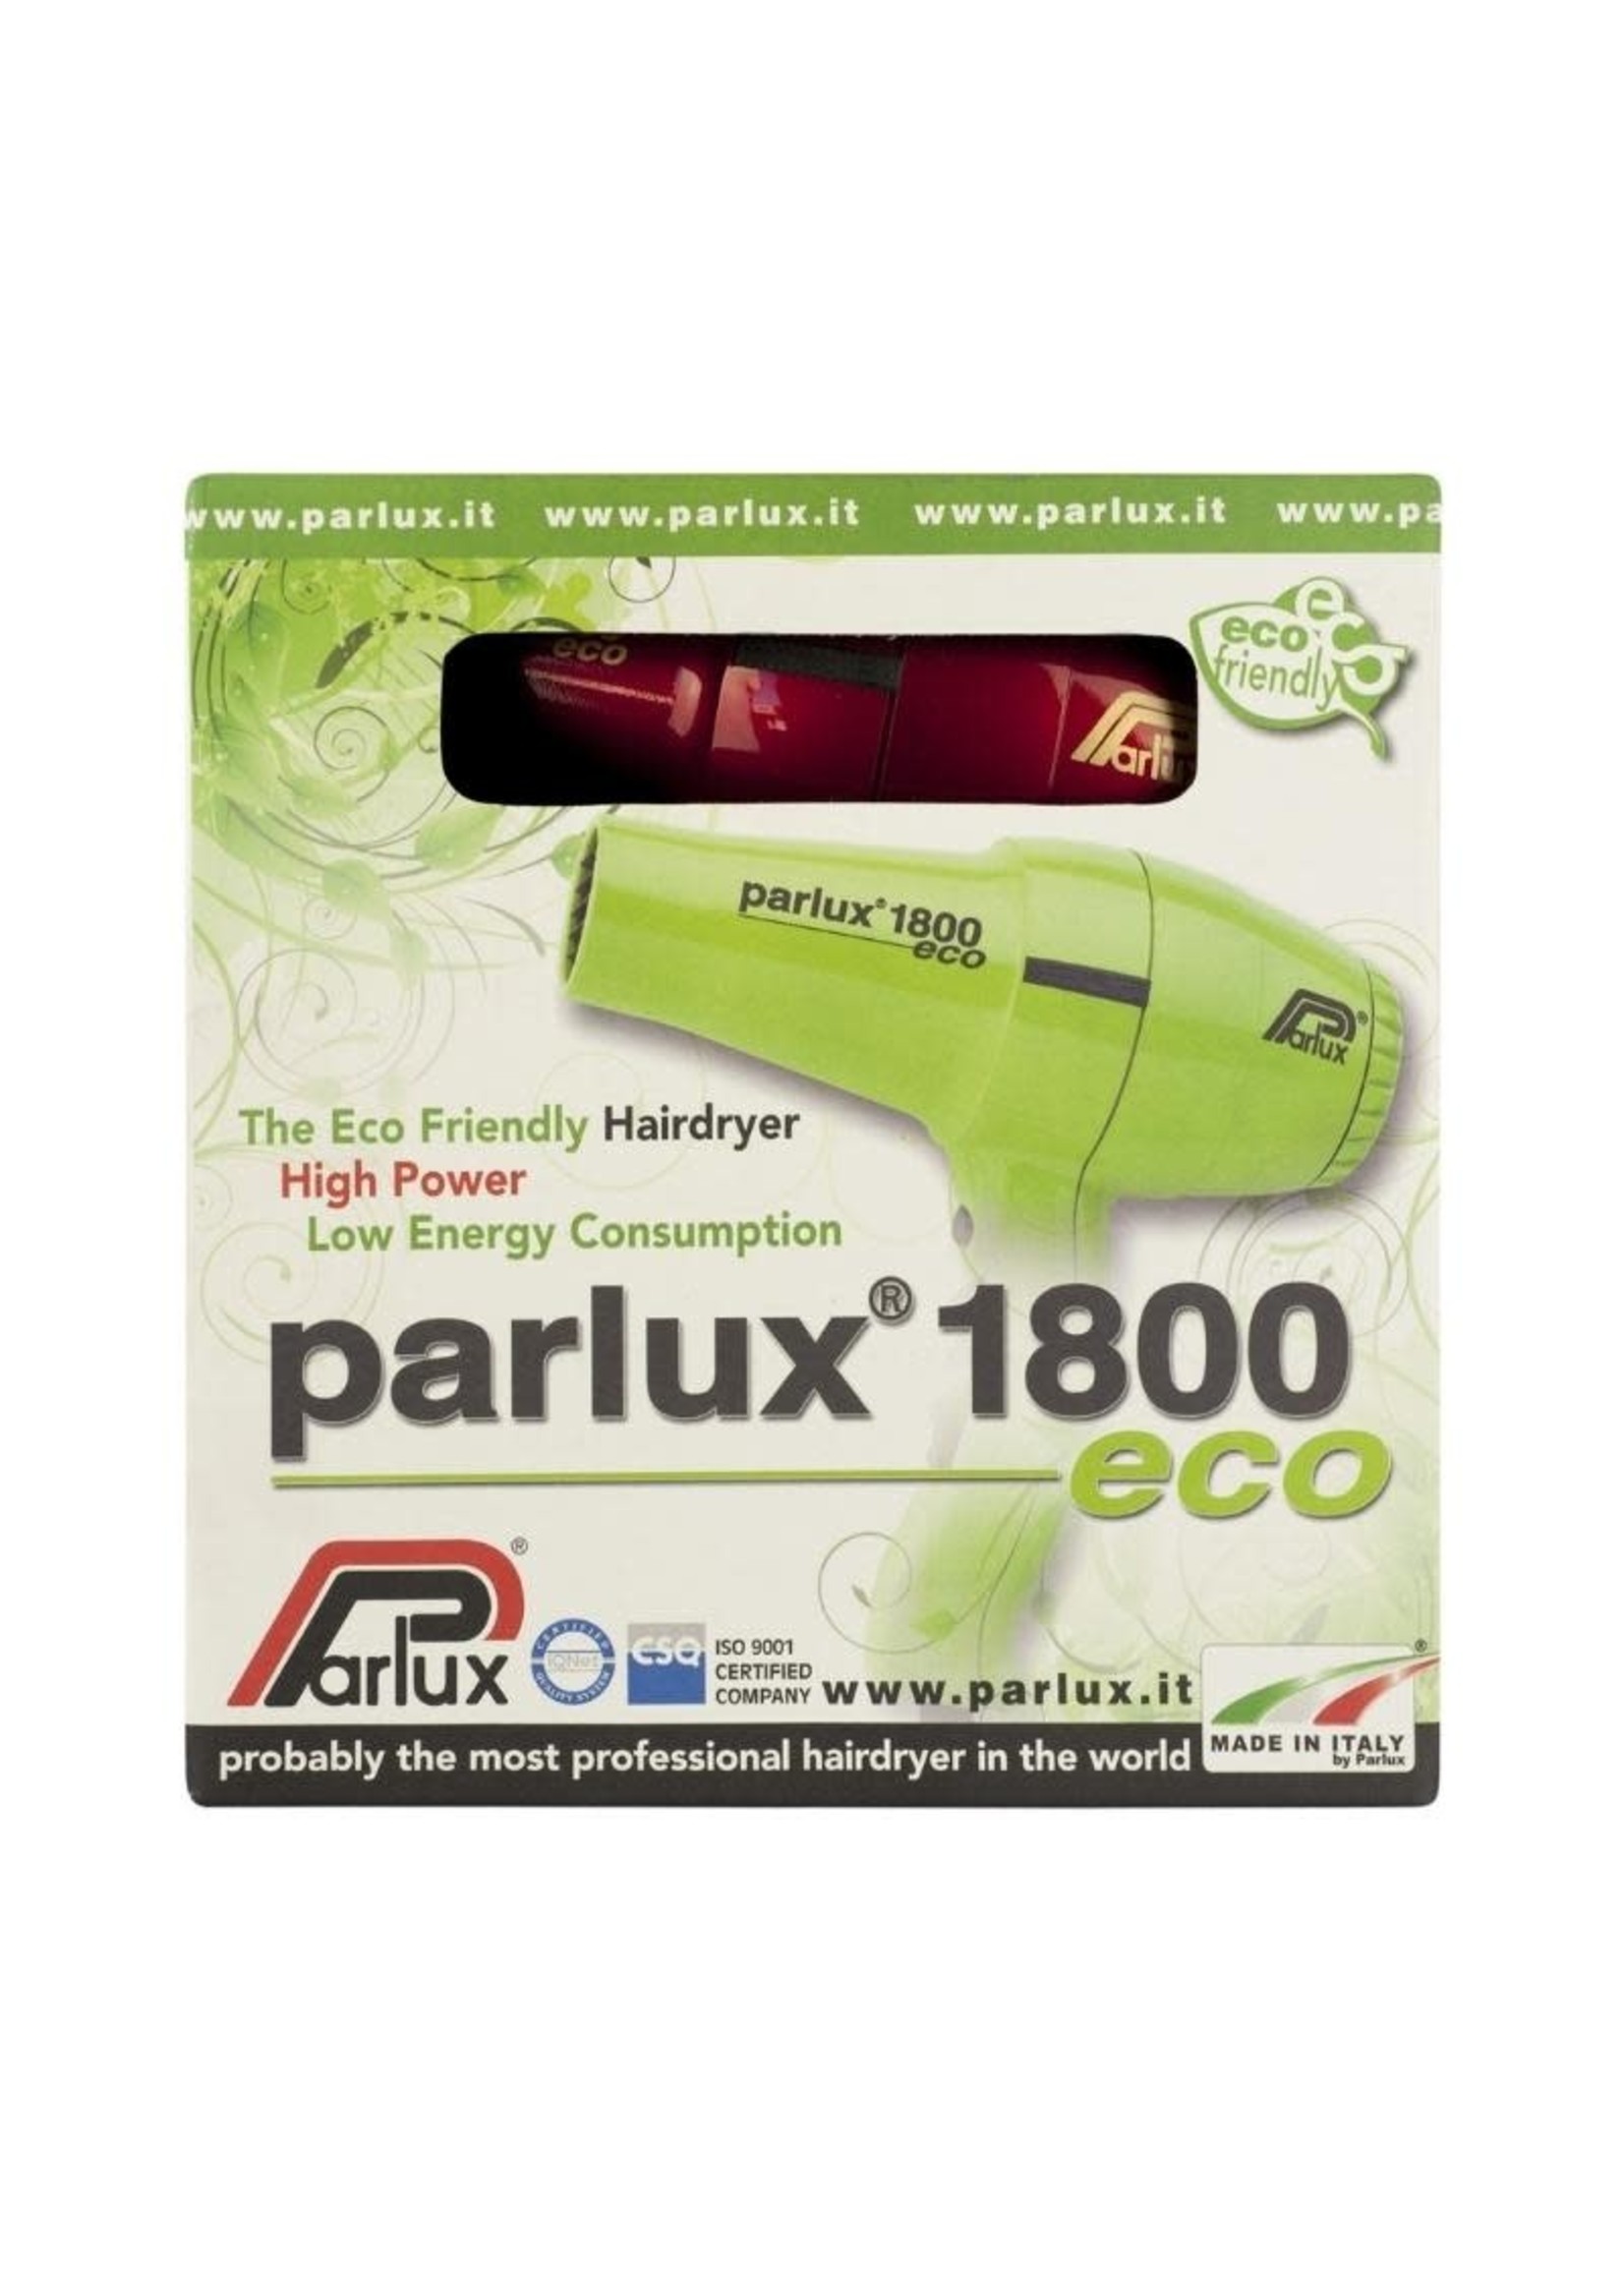 Parlux Parlux 1800 Eco Hairdryer - Red